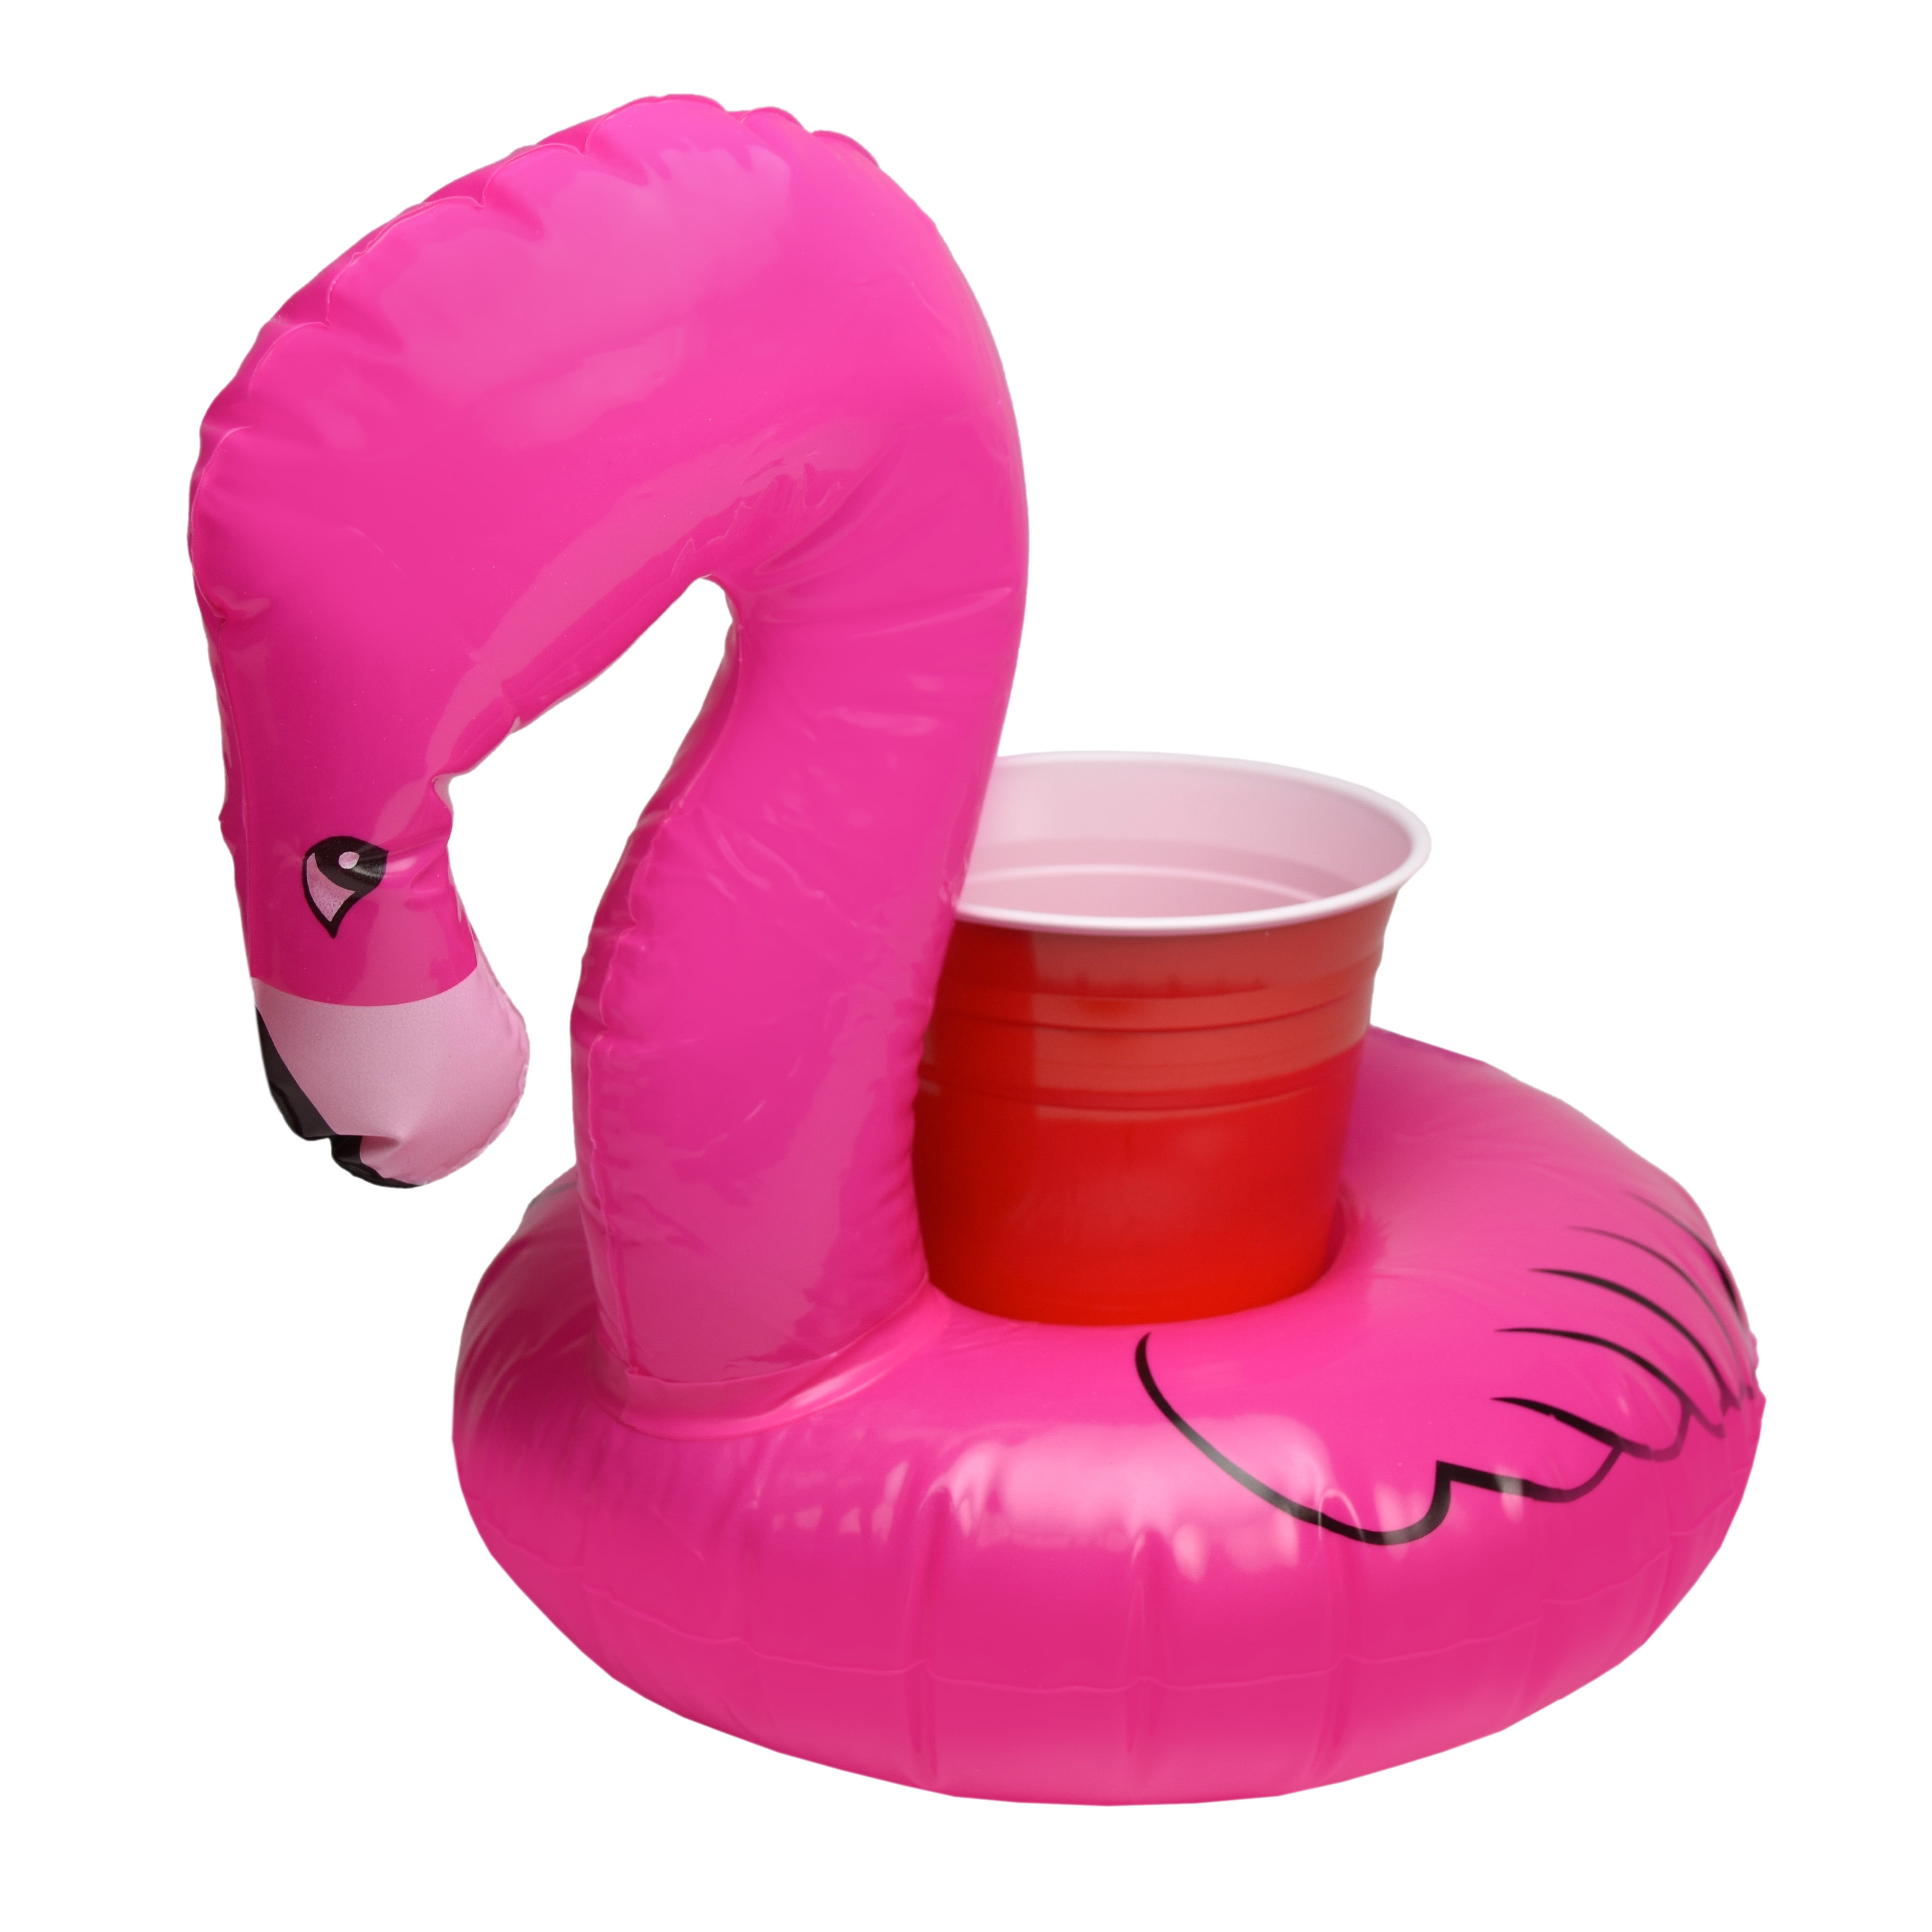 Funky Tropical Inflatable Drinks Holder Flamingo Cup15 for sale online 